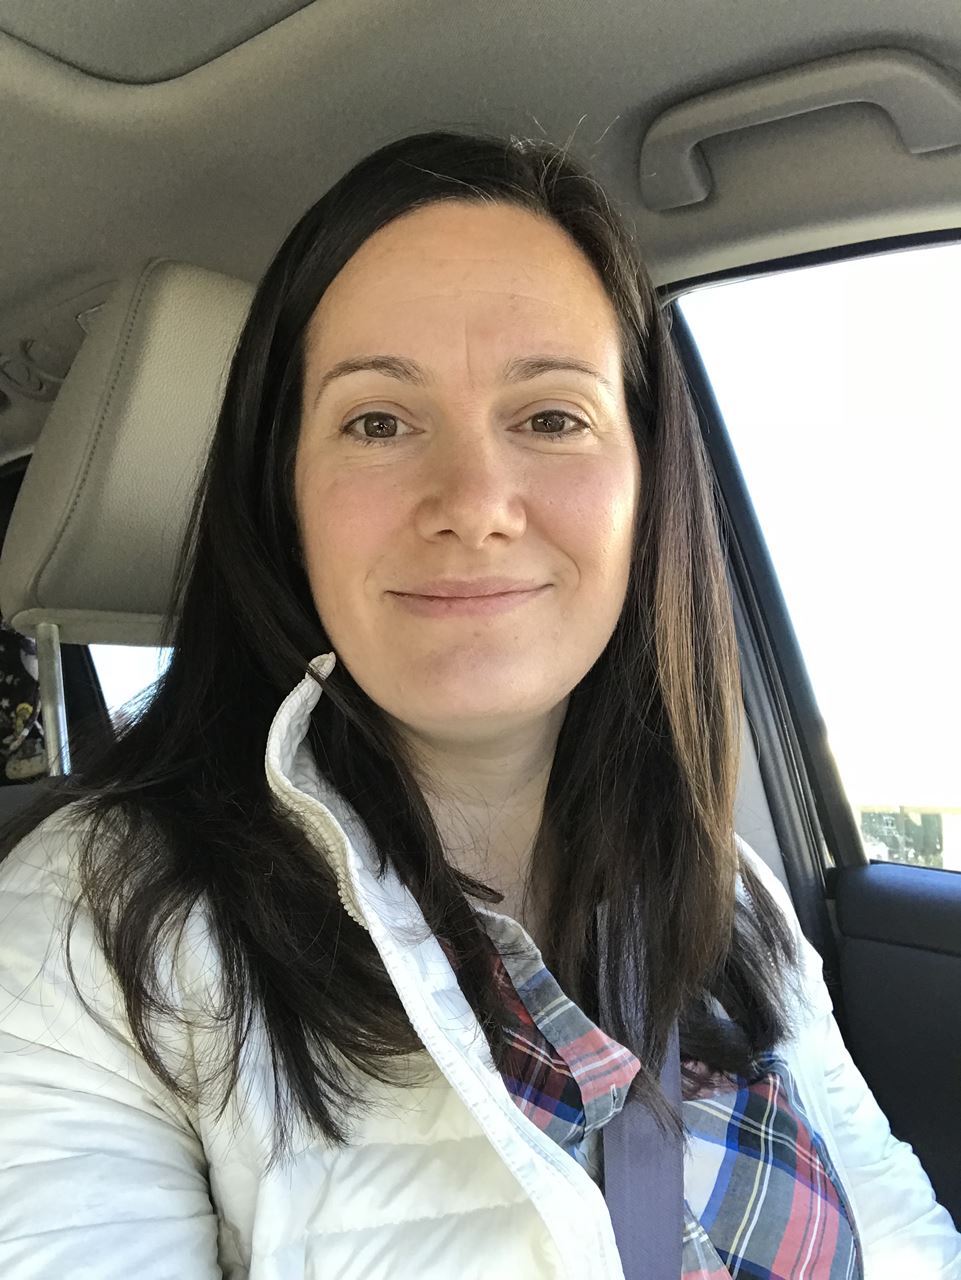 [image description White female sitting in car. She has long, straight, dark brown hair and is wearing a plaid shirt and white jacket. She is smiling at the camera.]